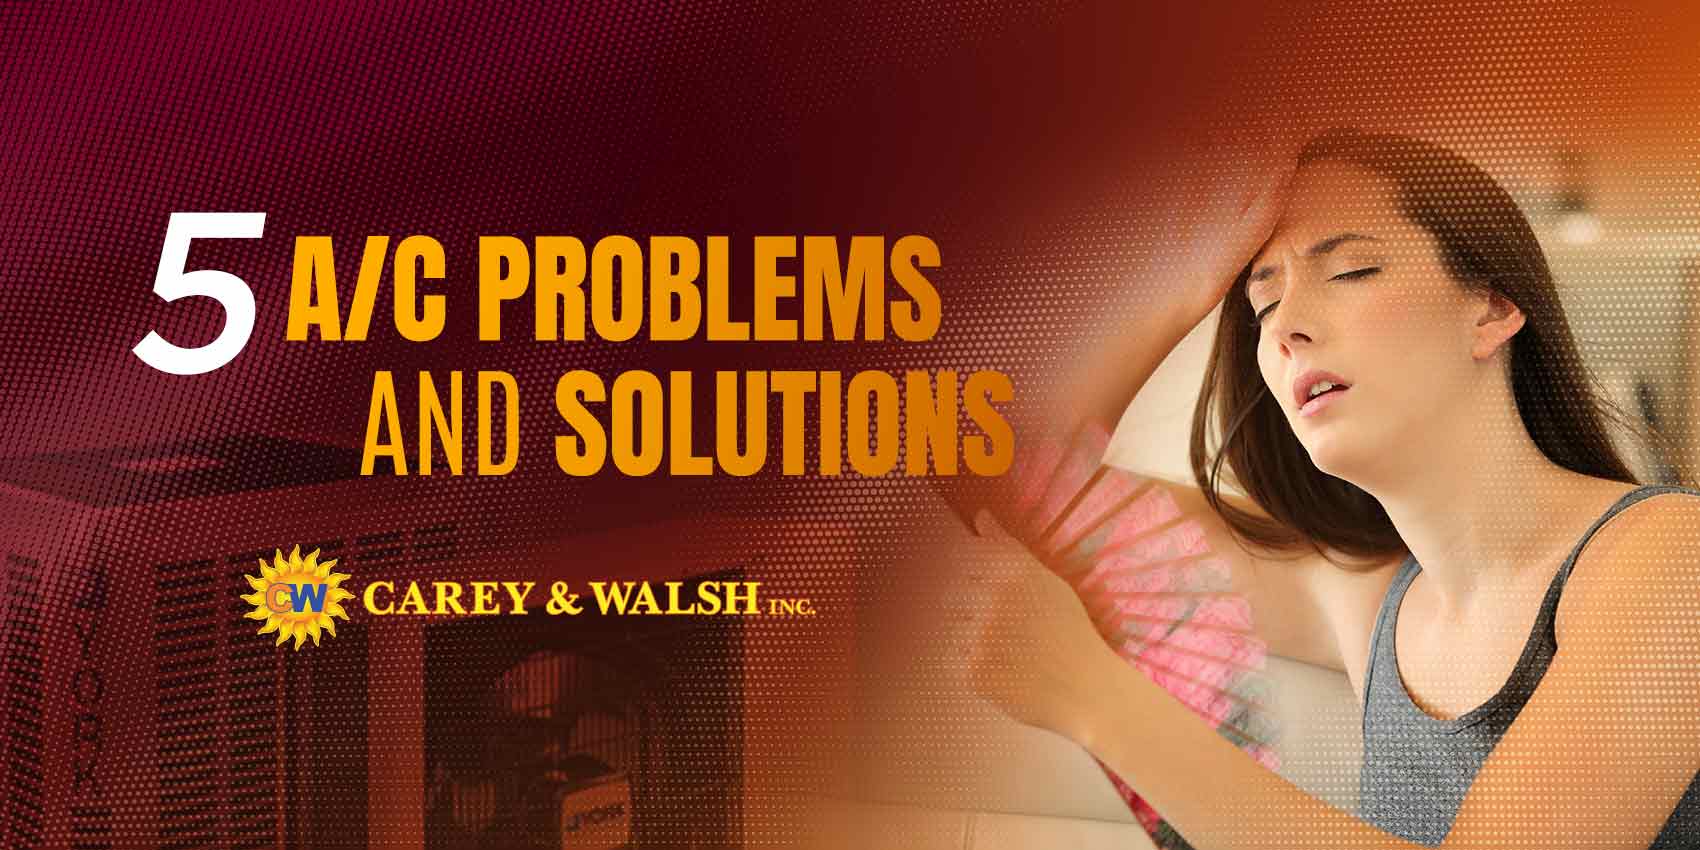 5 A/C Problems & Solutions